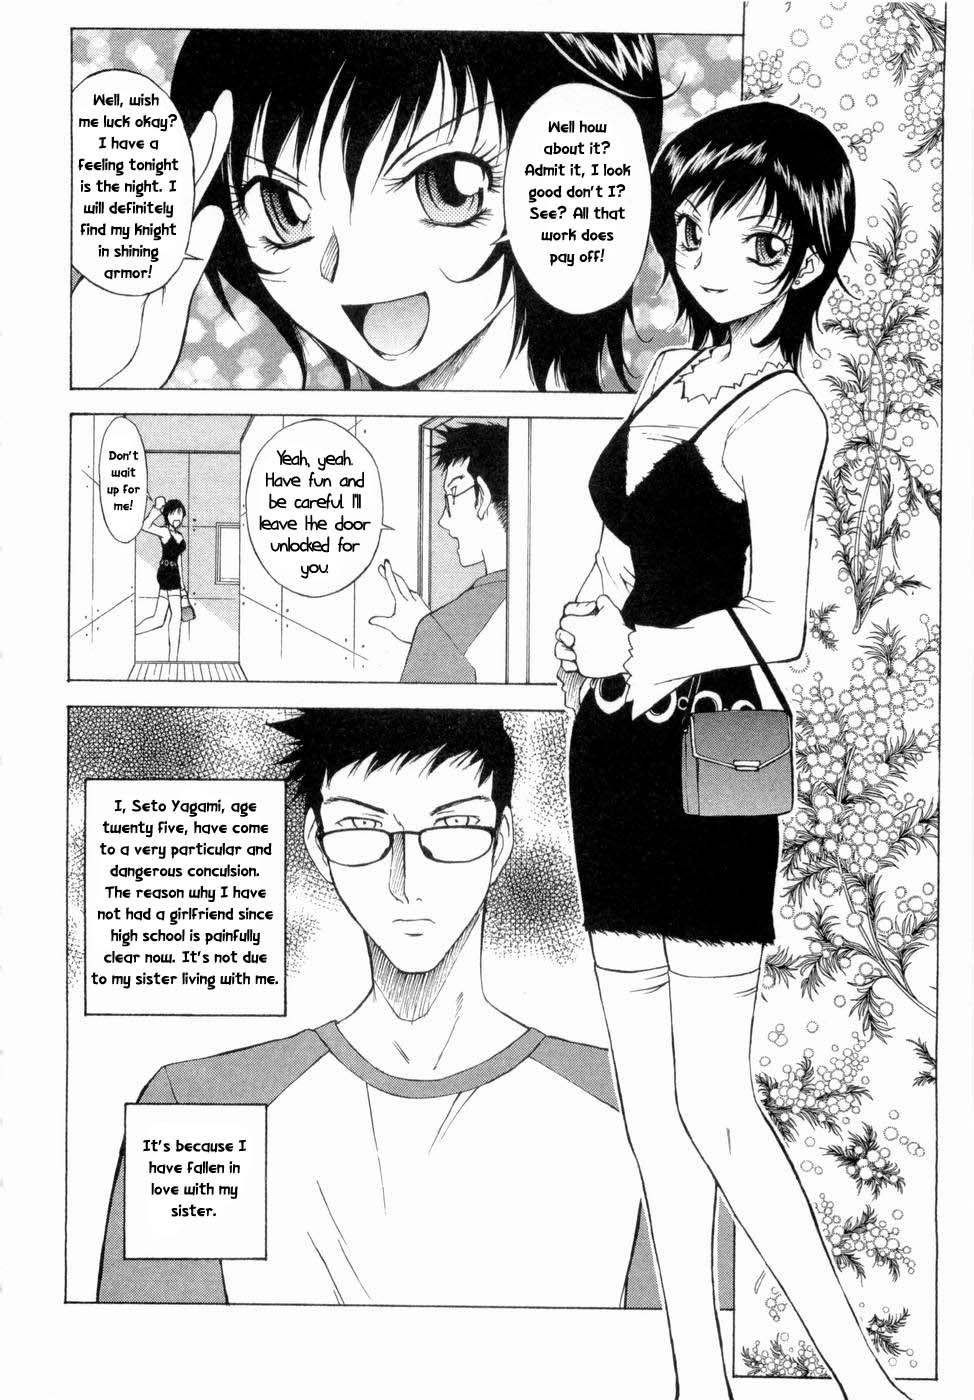 Indonesian Sister's Date Fetish - Page 6